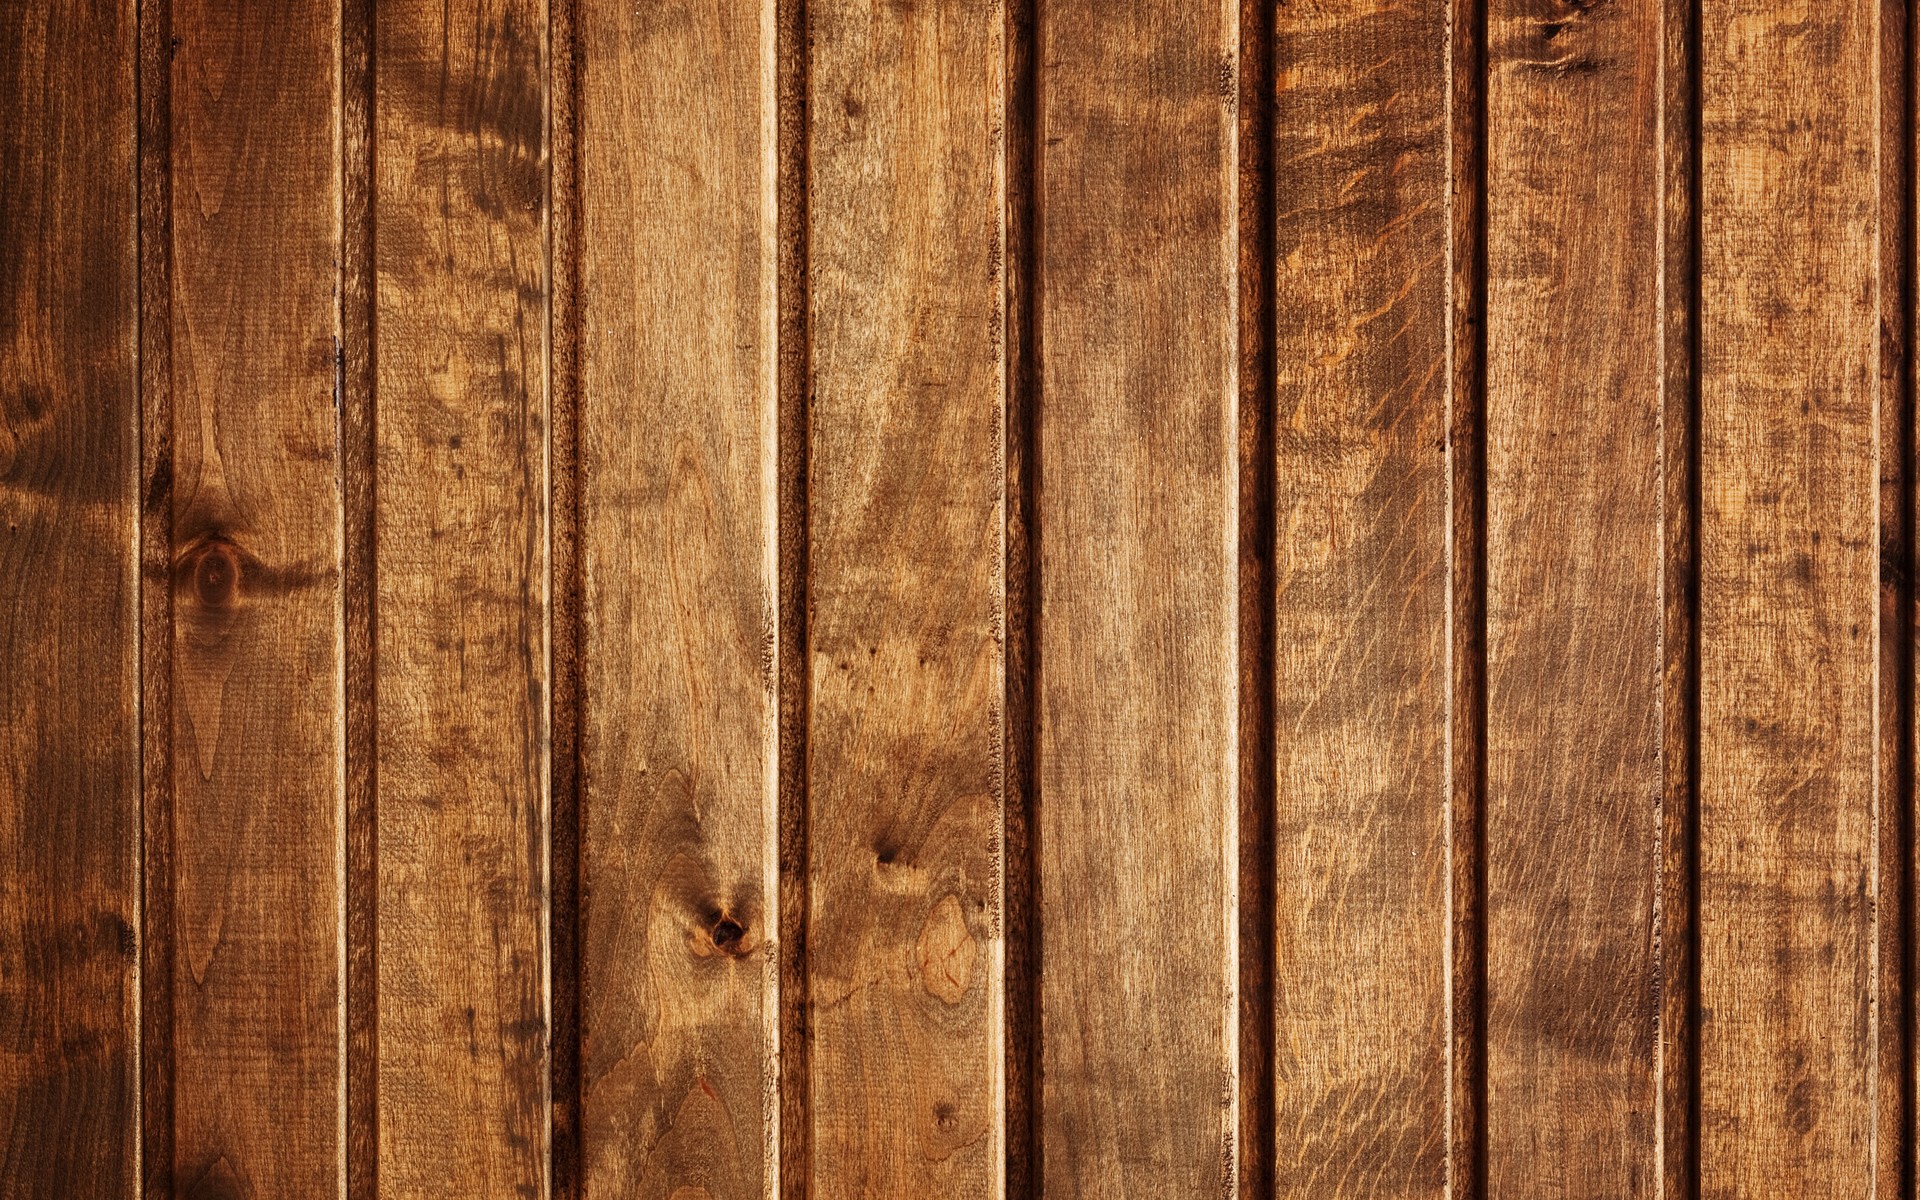 62 Wood  backgrounds    Download free stunning HD 